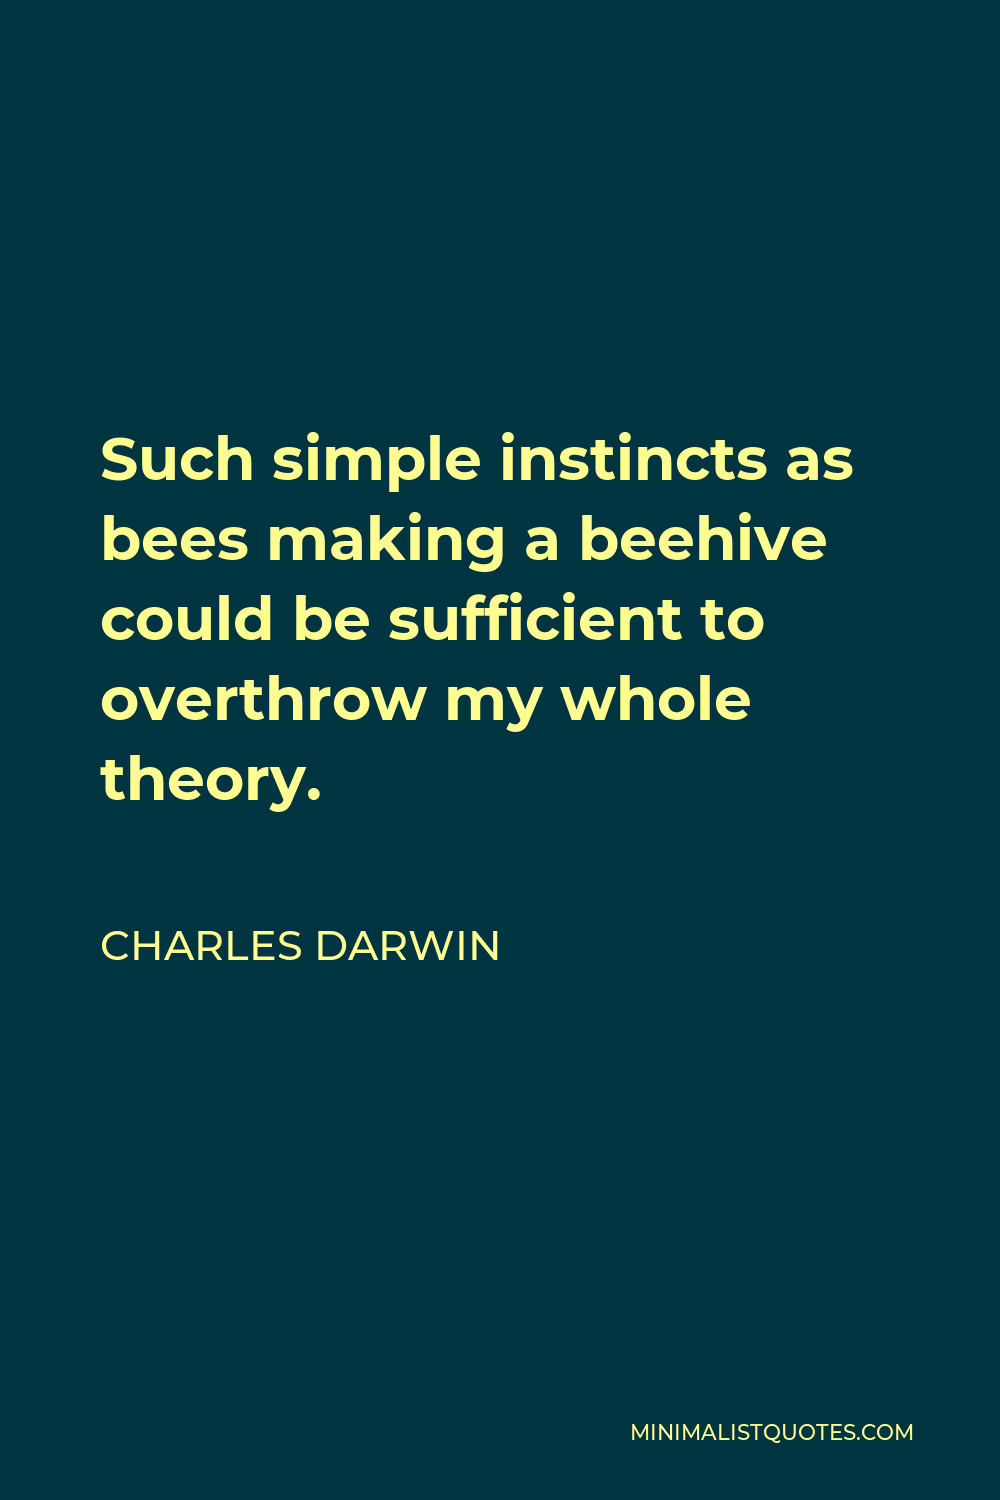 Charles Darwin Quote - Such simple instincts as bees making a beehive could be sufficient to overthrow my whole theory.